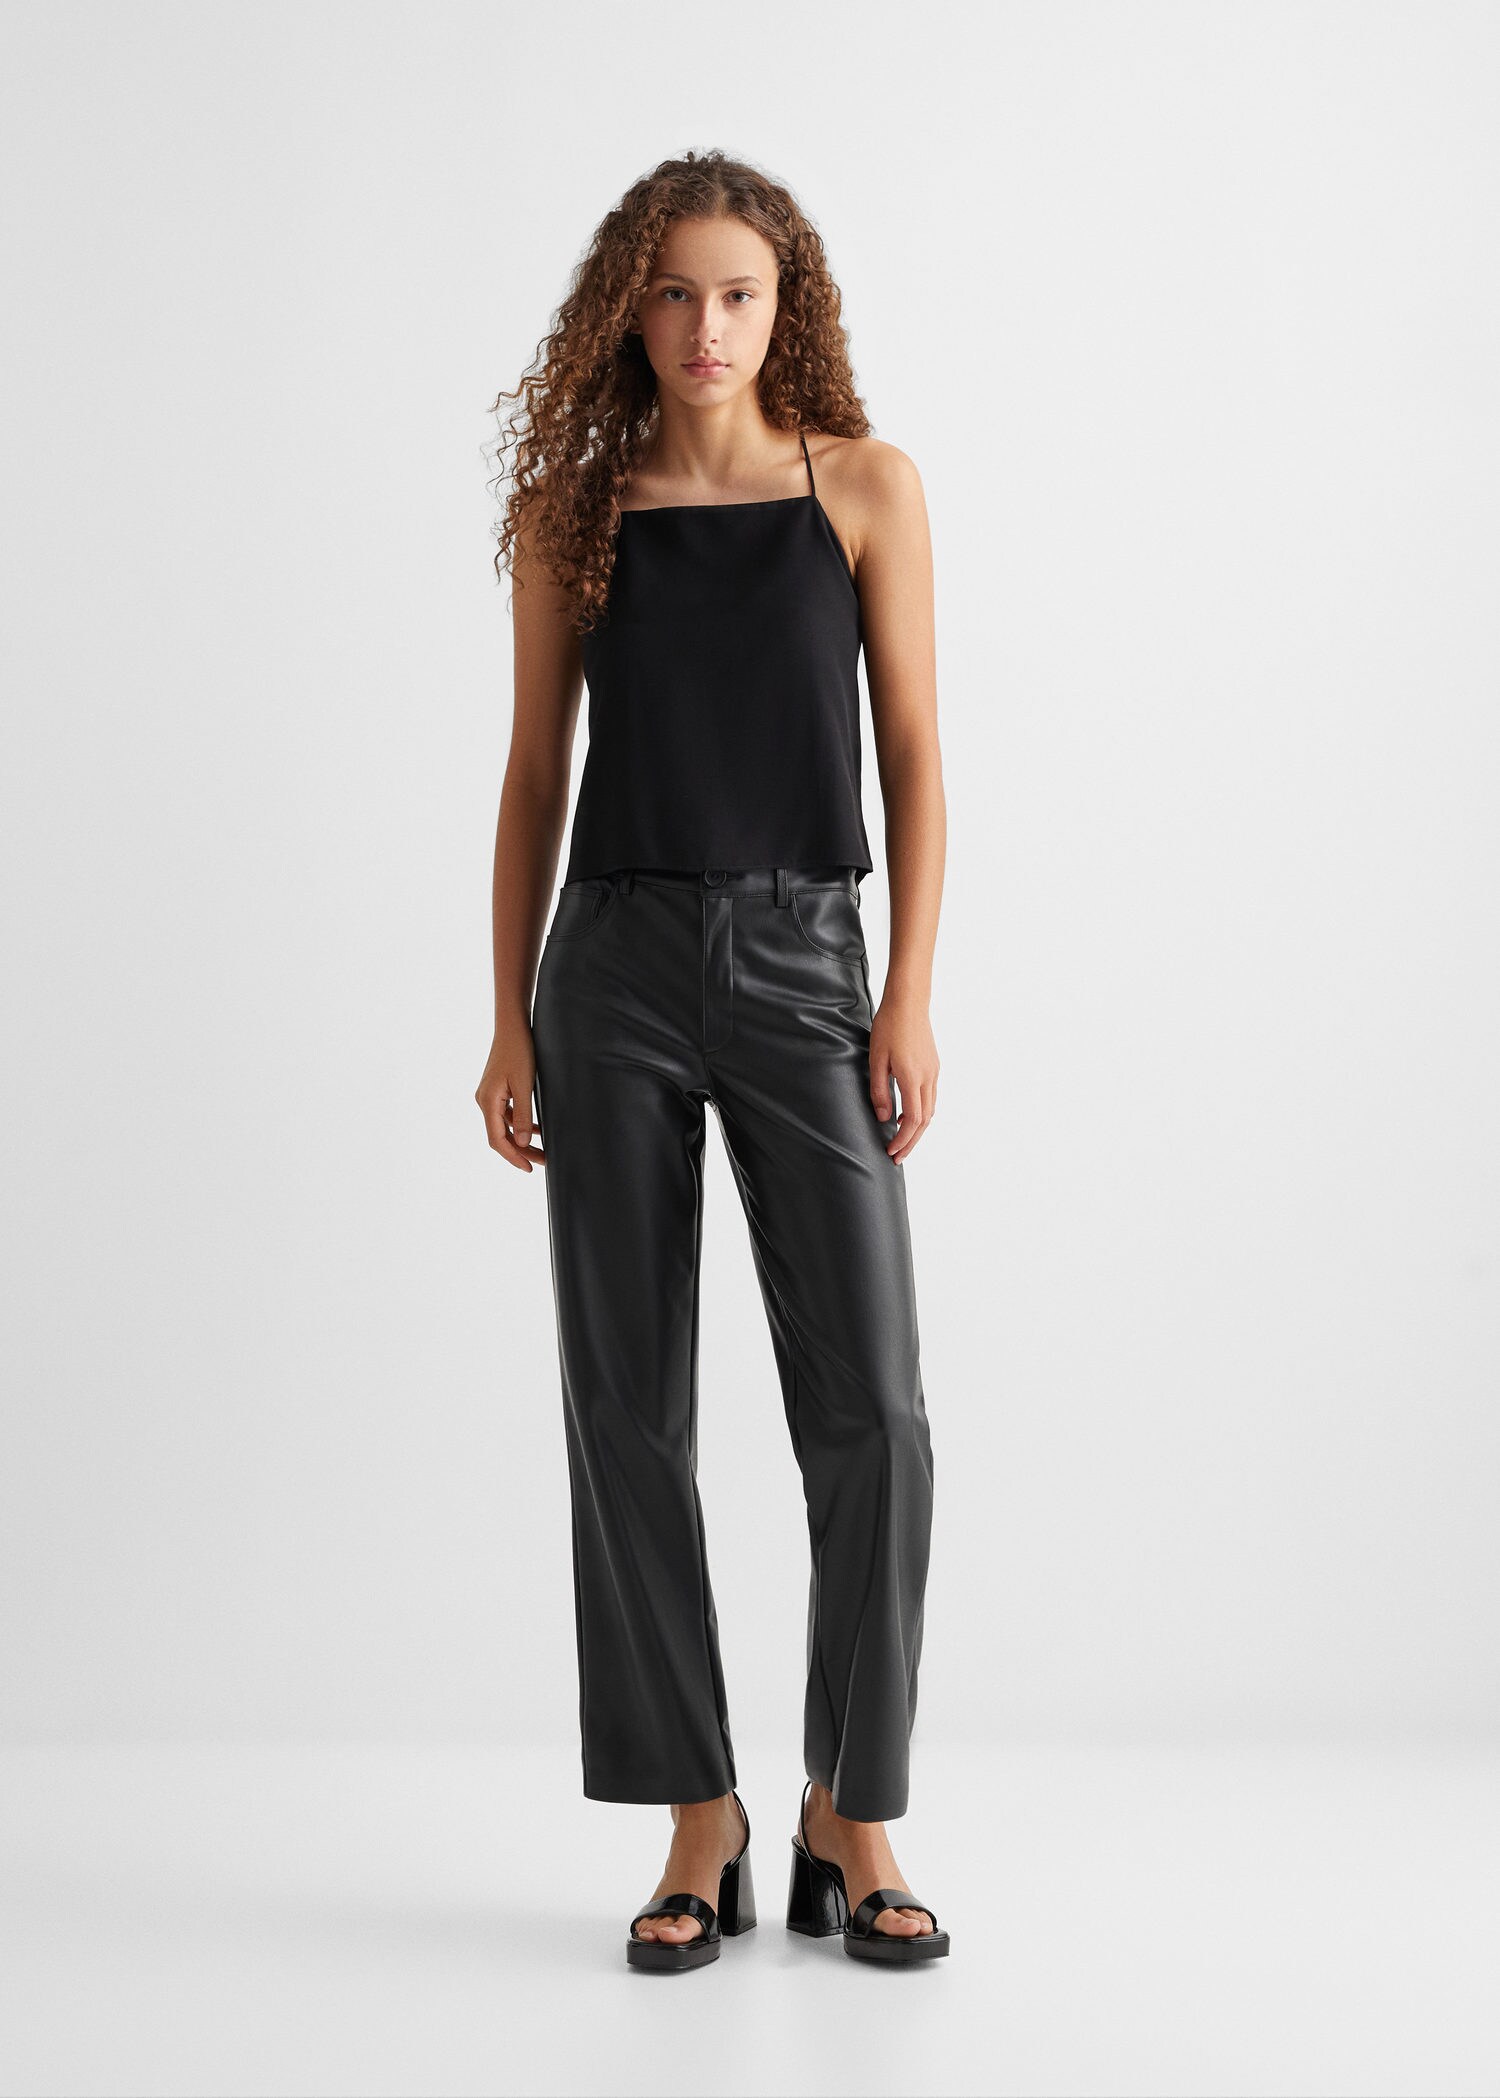 MANGO Leather Crop Trousers in Black | Endource